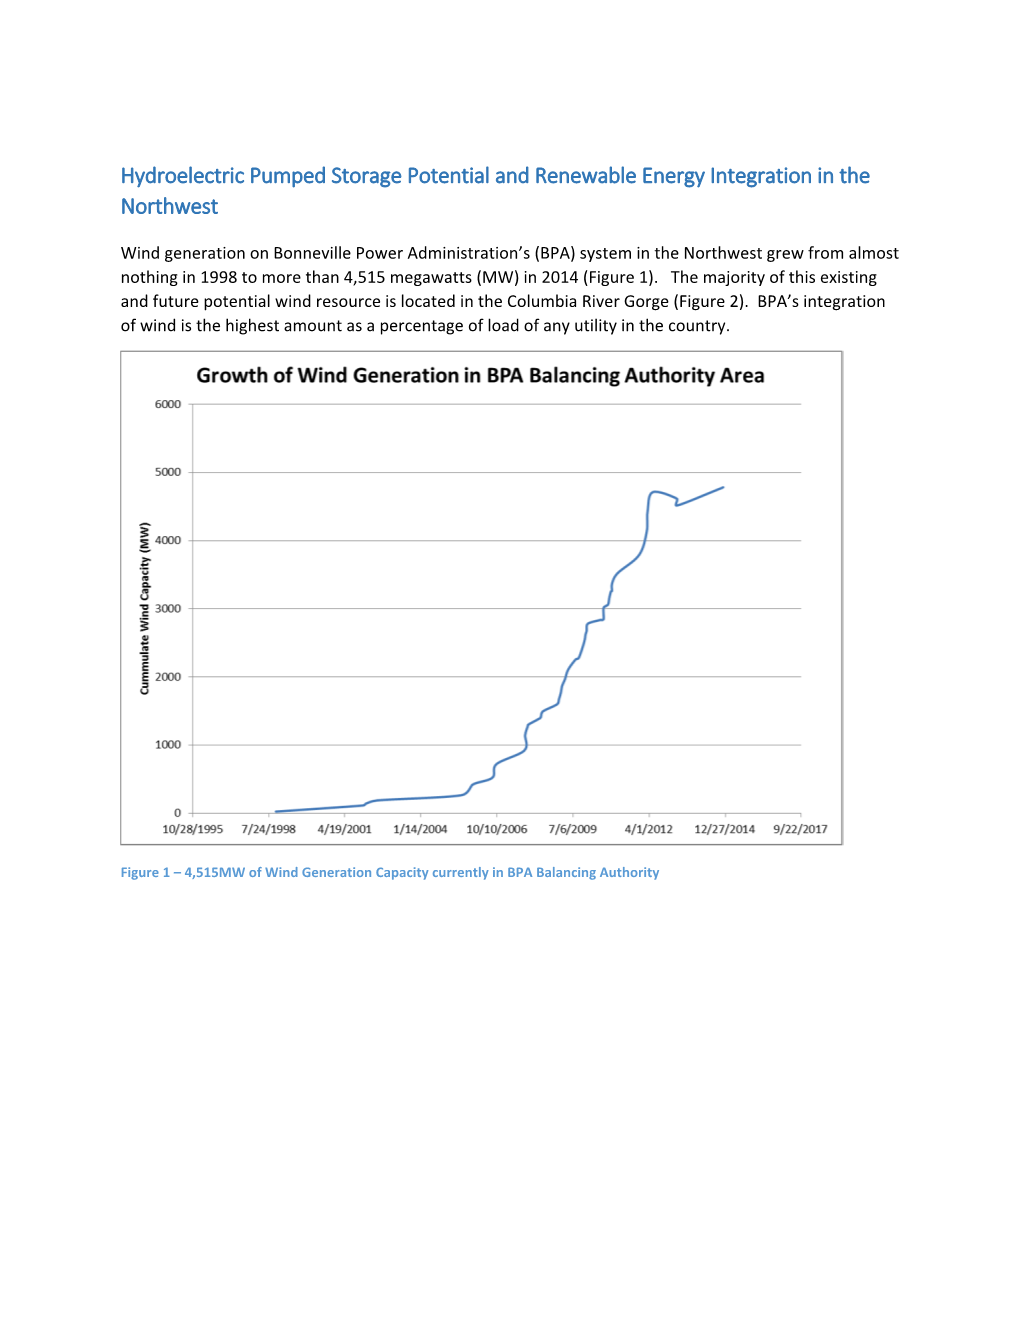 Hydroelectric Pumped Storage Potential and Renewable Energy Integration in the Northwest